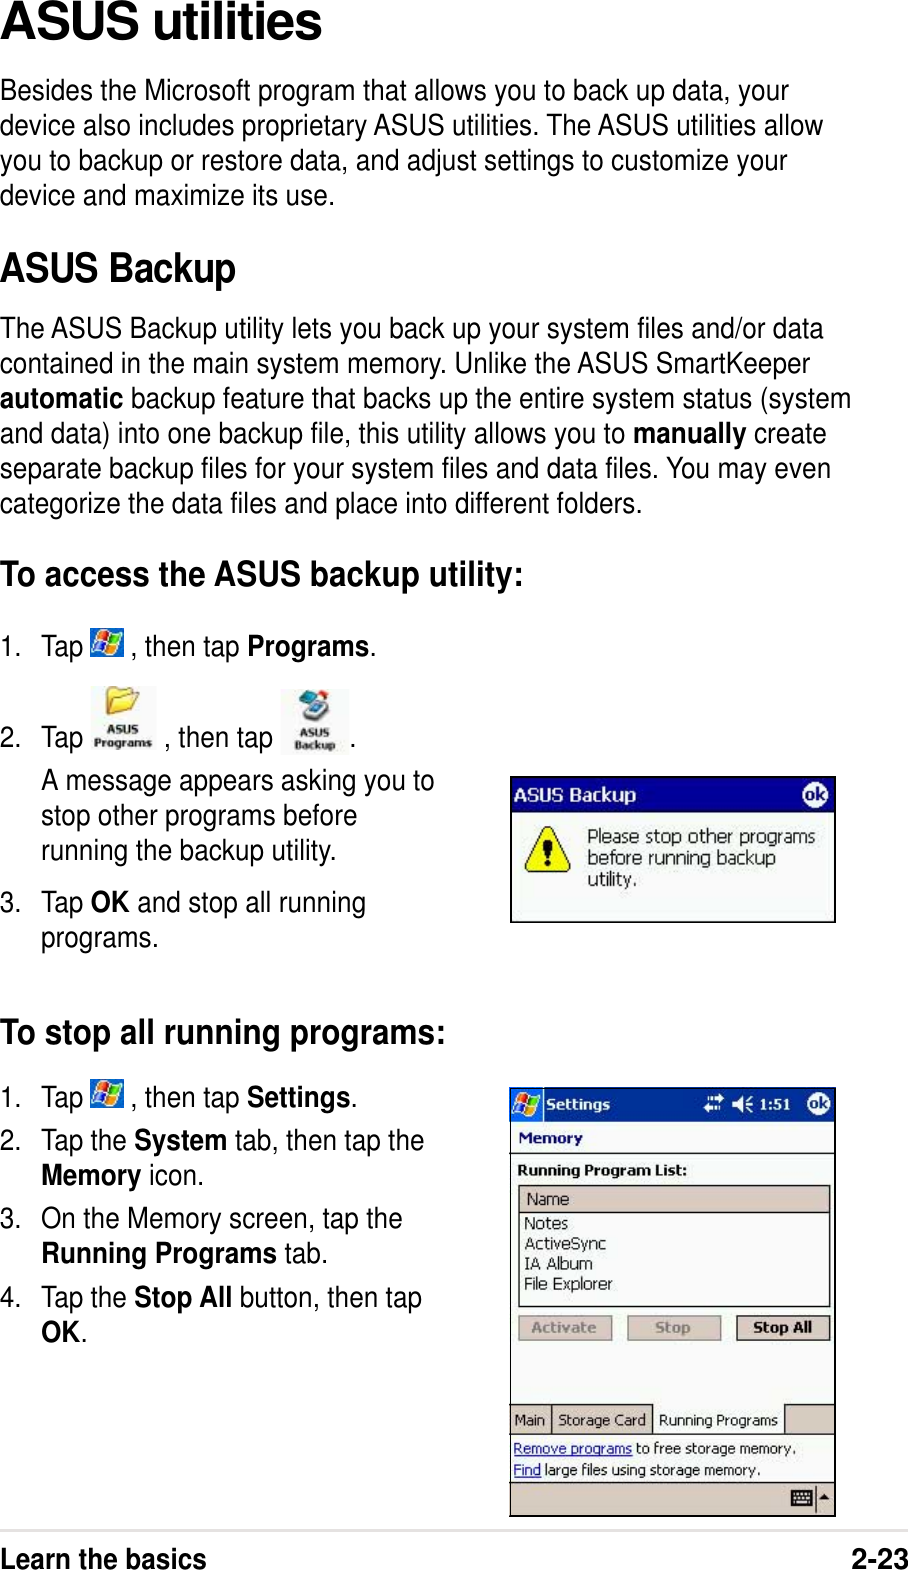 Learn the basics2-231. Tap   , then tap Settings.2. Tap the System tab, then tap theMemory icon.3. On the Memory screen, tap theRunning Programs tab.4. Tap the Stop All button, then tapOK.2. Tap   , then tap  .A message appears asking you tostop other programs beforerunning the backup utility.3. Tap OK and stop all runningprograms.To stop all running programs:ASUS utilitiesBesides the Microsoft program that allows you to back up data, yourdevice also includes proprietary ASUS utilities. The ASUS utilities allowyou to backup or restore data, and adjust settings to customize yourdevice and maximize its use.ASUS BackupThe ASUS Backup utility lets you back up your system files and/or datacontained in the main system memory. Unlike the ASUS SmartKeeperautomatic backup feature that backs up the entire system status (systemand data) into one backup file, this utility allows you to manually createseparate backup files for your system files and data files. You may evencategorize the data files and place into different folders.To access the ASUS backup utility:1. Tap   , then tap Programs.